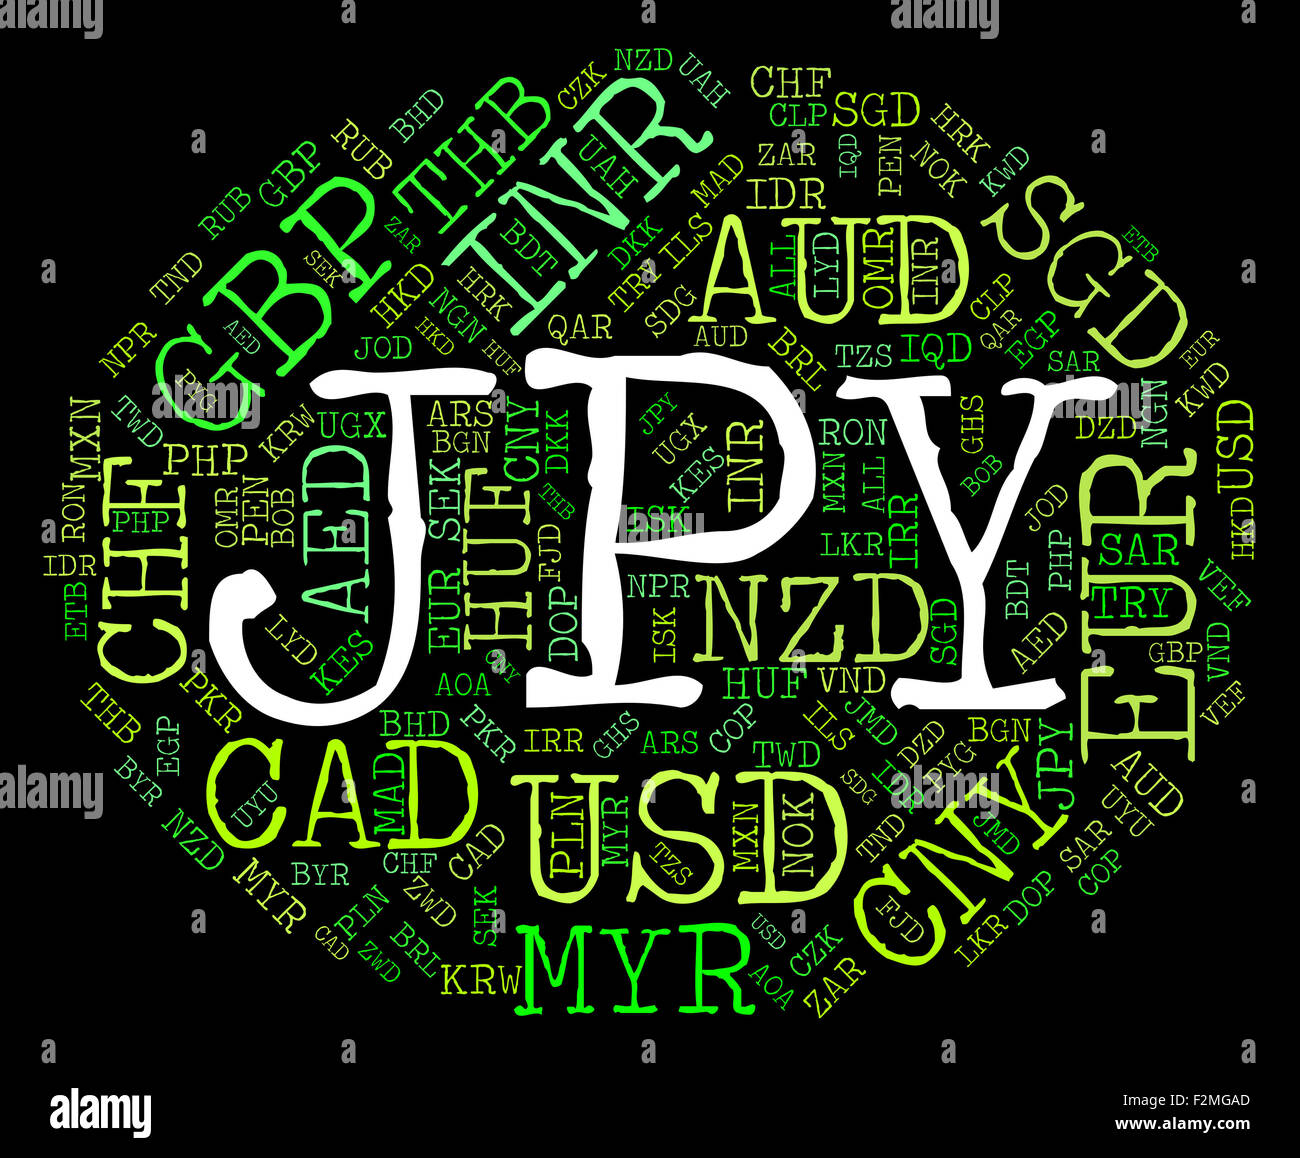 Jpy Currency Meaning Forex Trading And Currencies Stock Photo